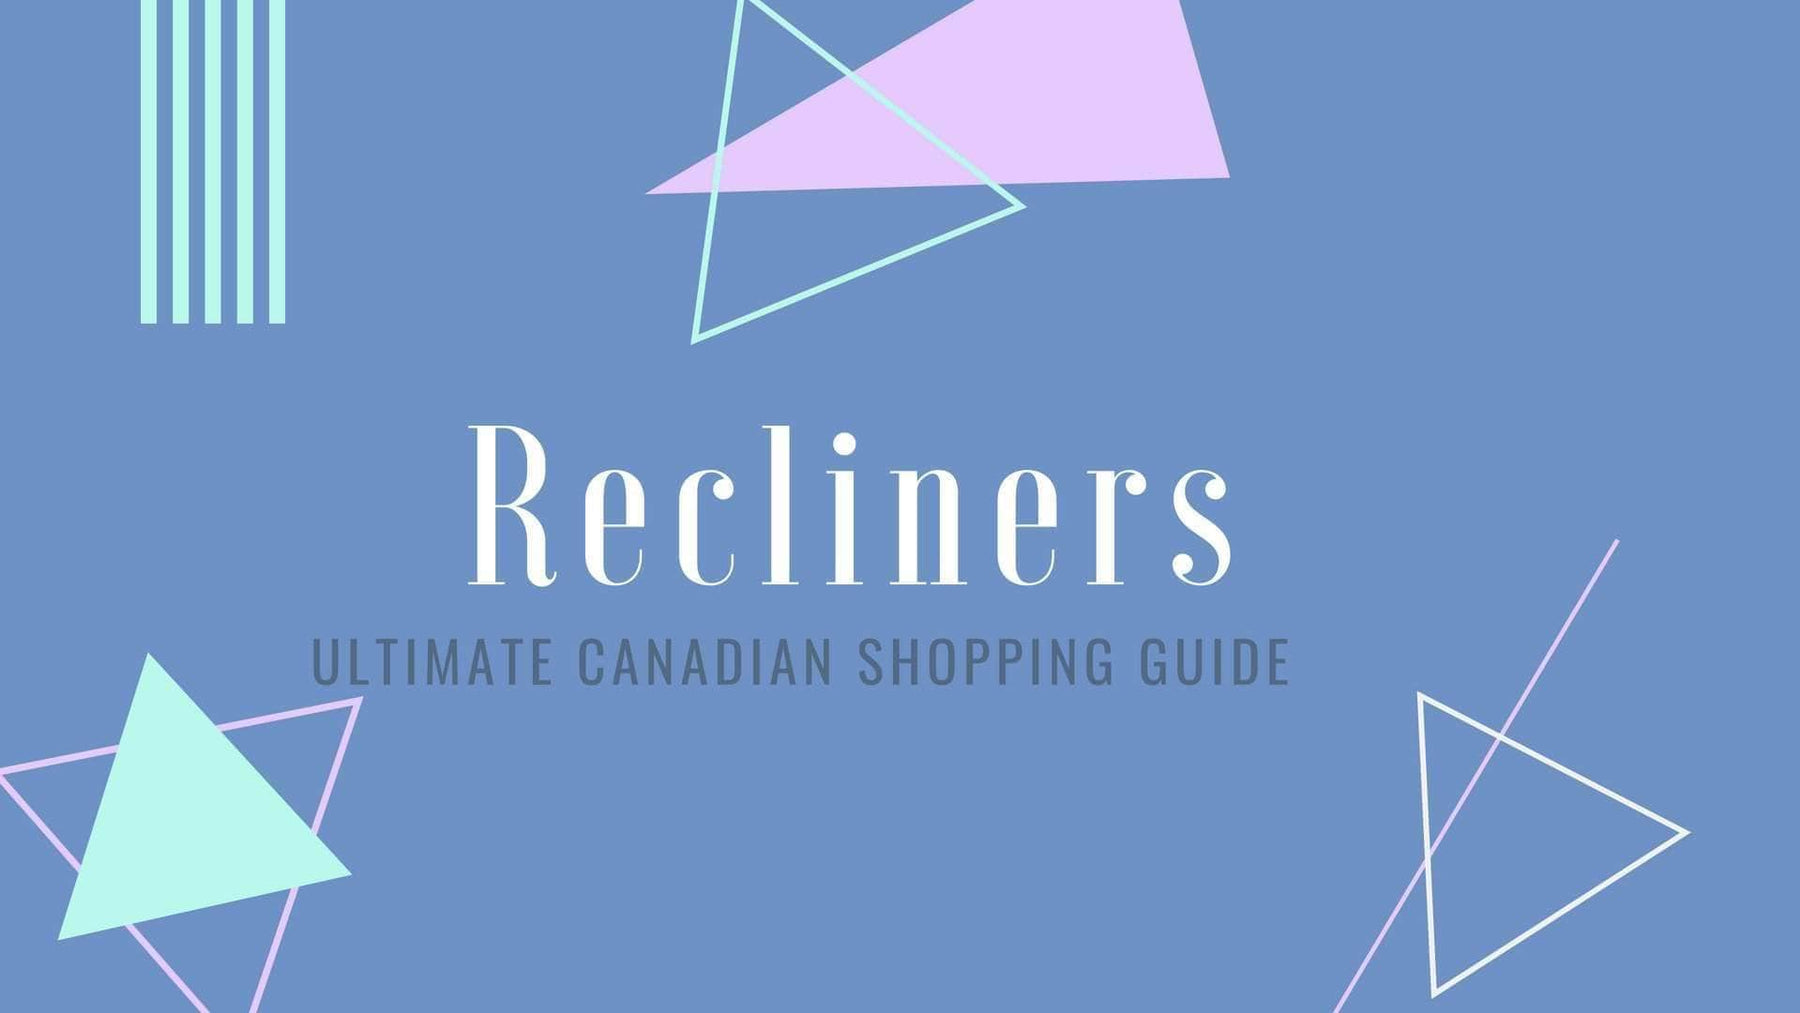 Recliners: Ultimate Canadian Shopping Guide 2018